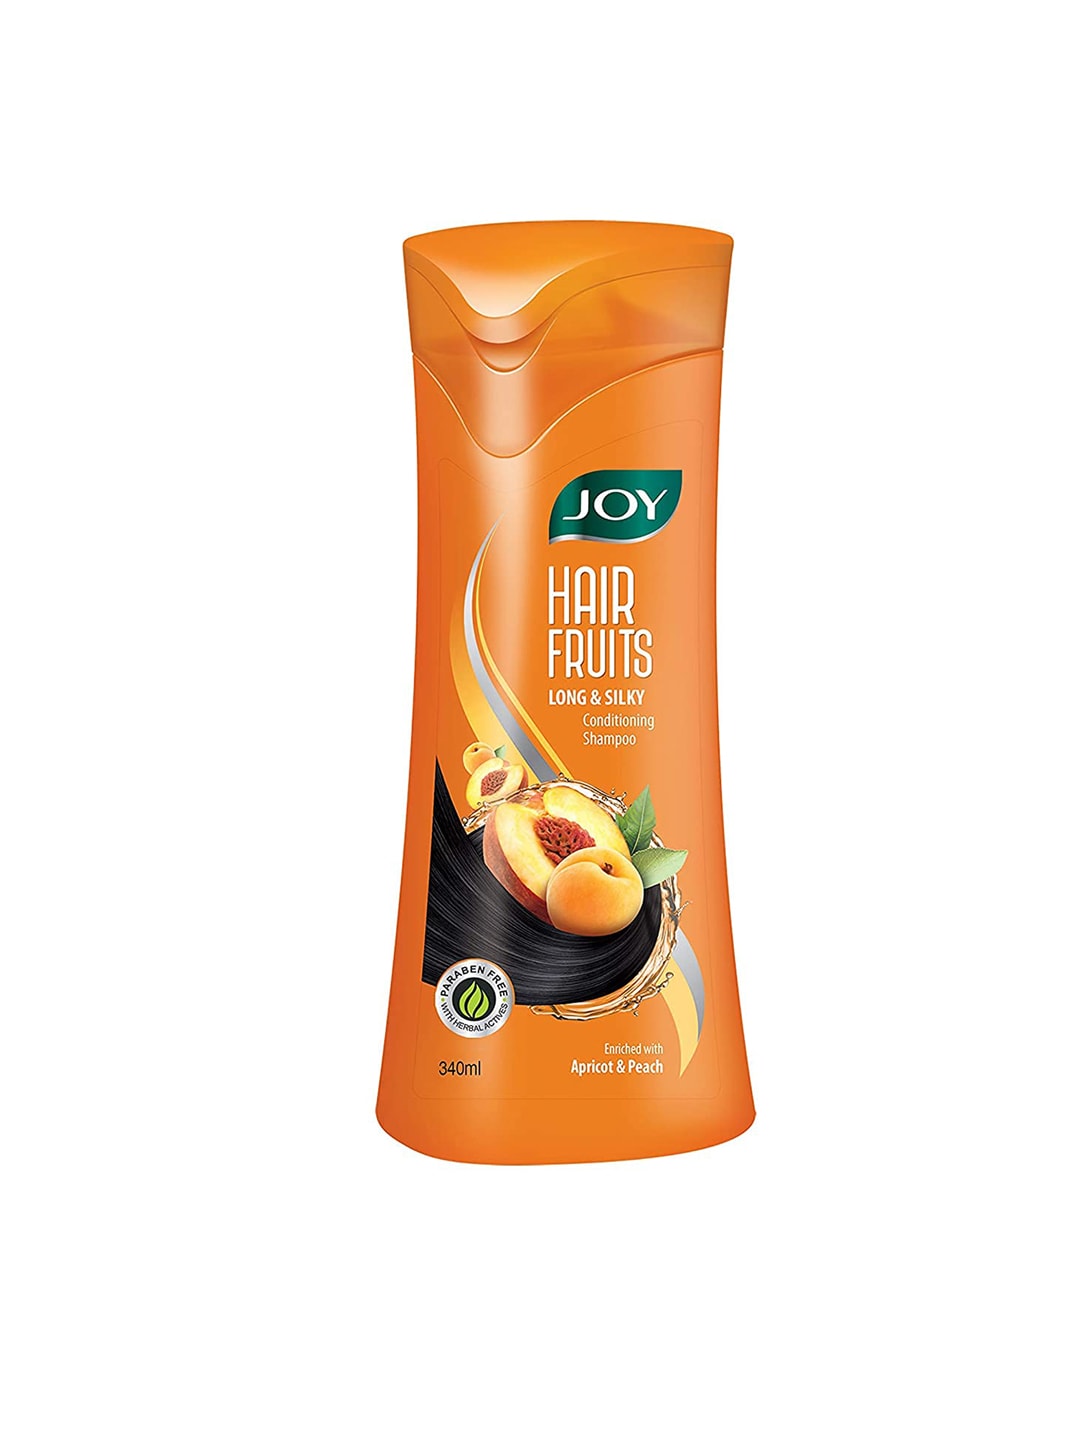 JOY Hair Fruits Long & Silky Conditioning Shampoo with Apricot & Peach - 340 ml Price in India